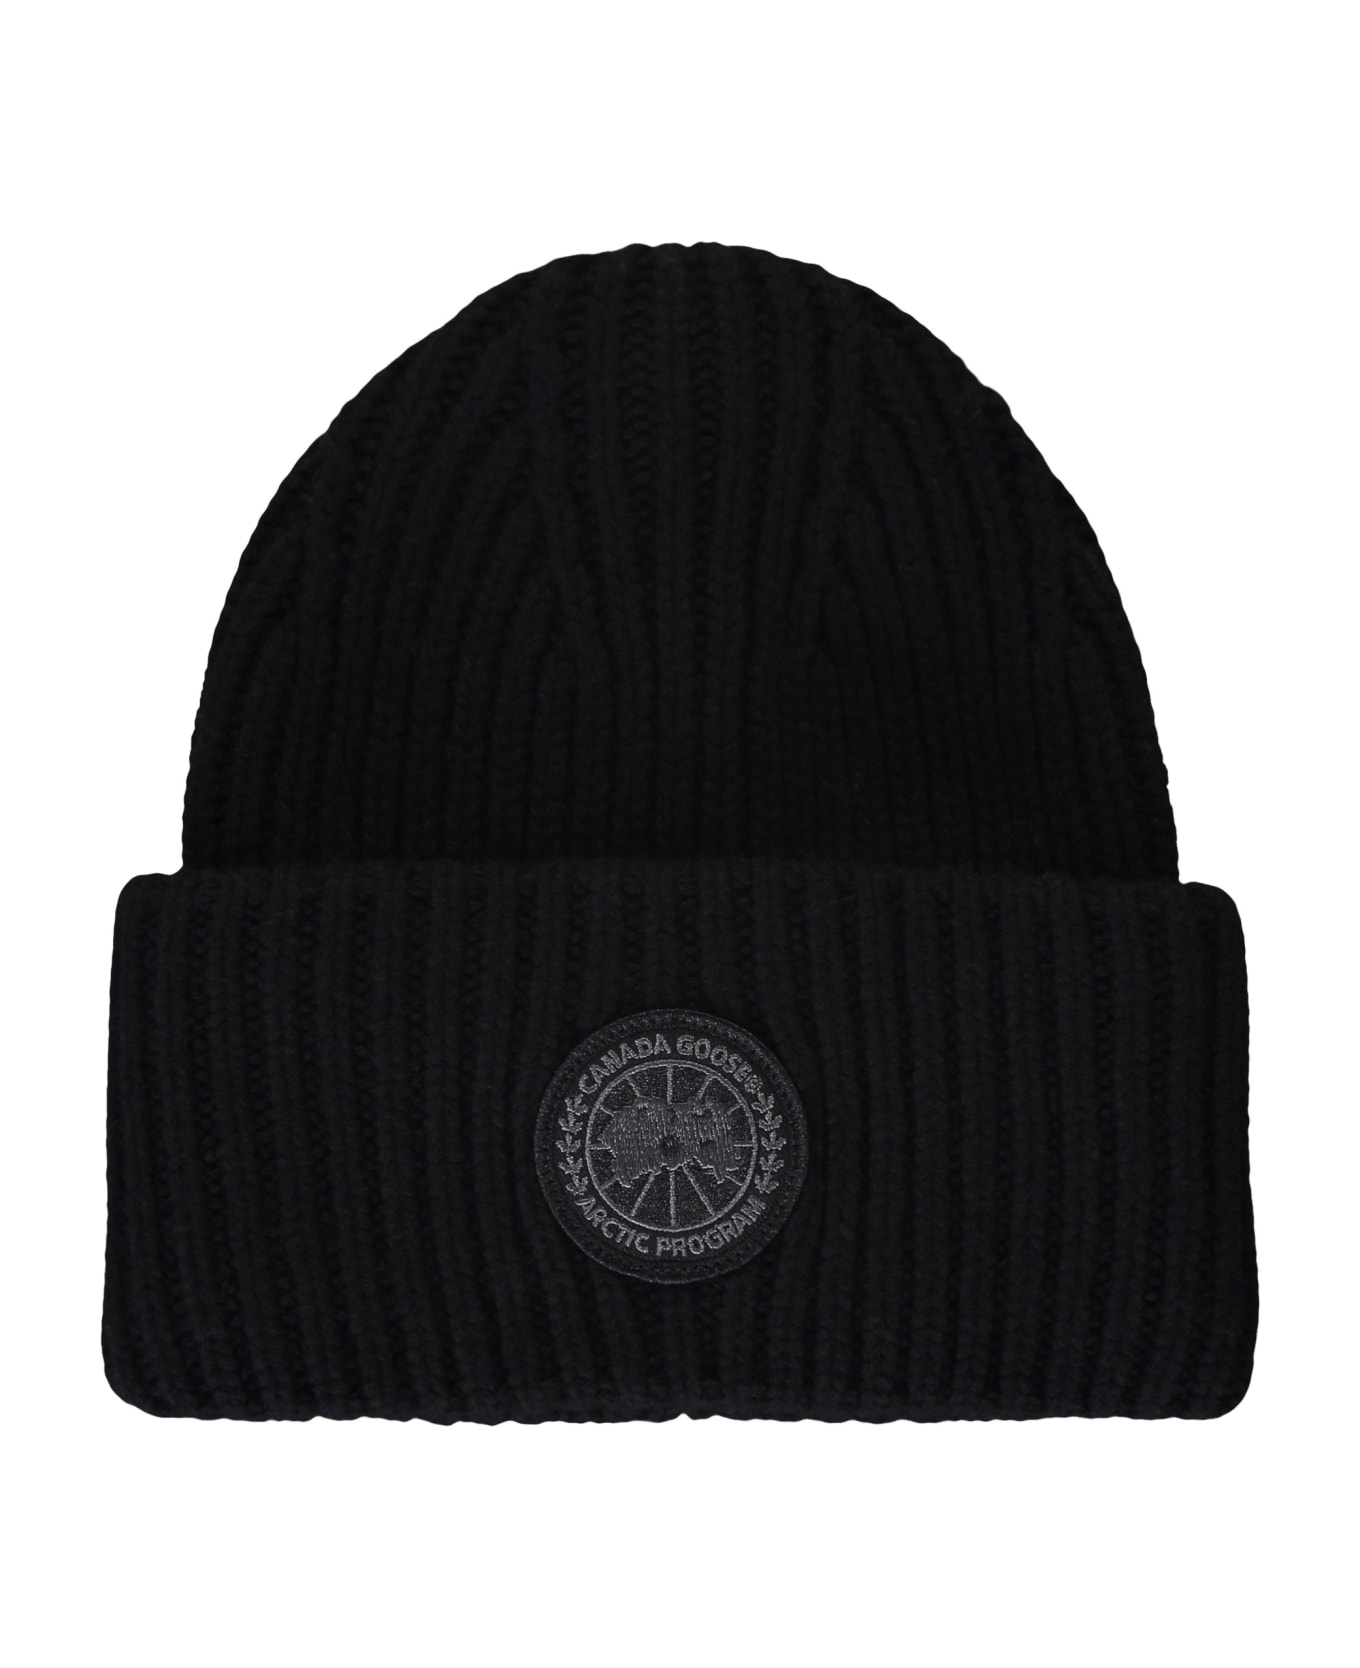 Canada Goose Ribbed Knit Beanie - black